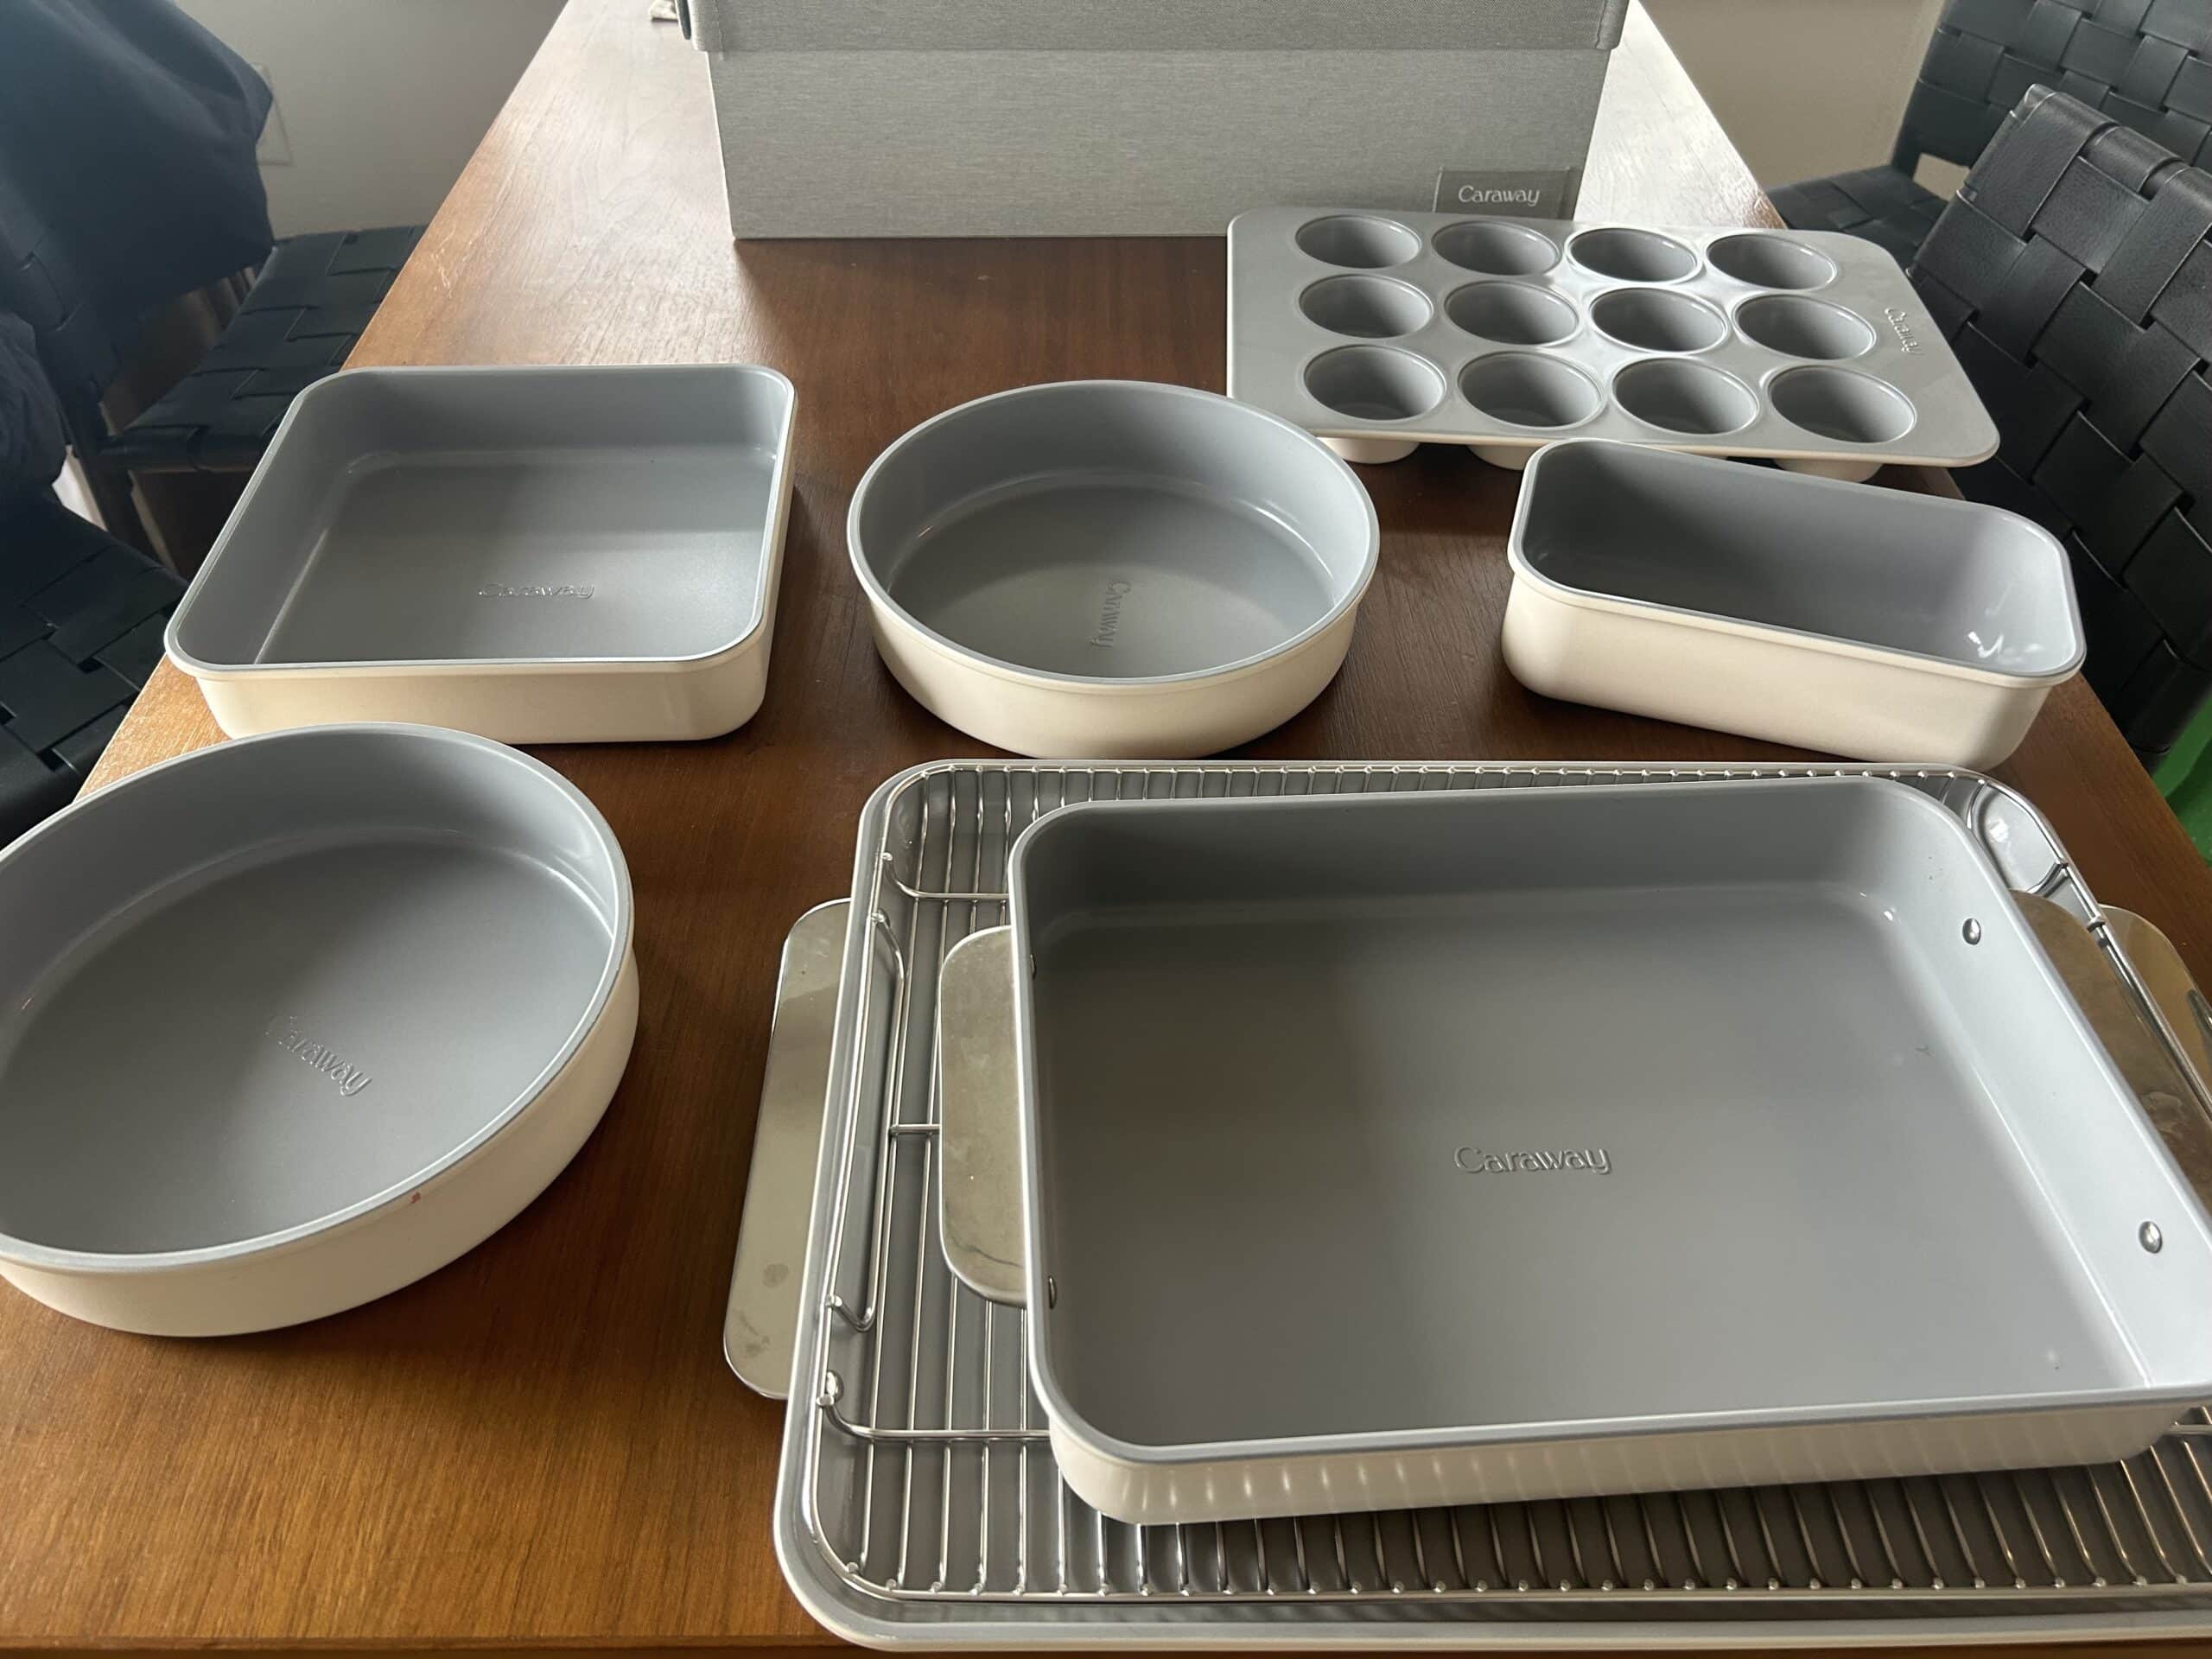 The 13 Best Non-Toxic Bakeware Sets (PFOA, PFAS, and PTFE free) - LeafScore